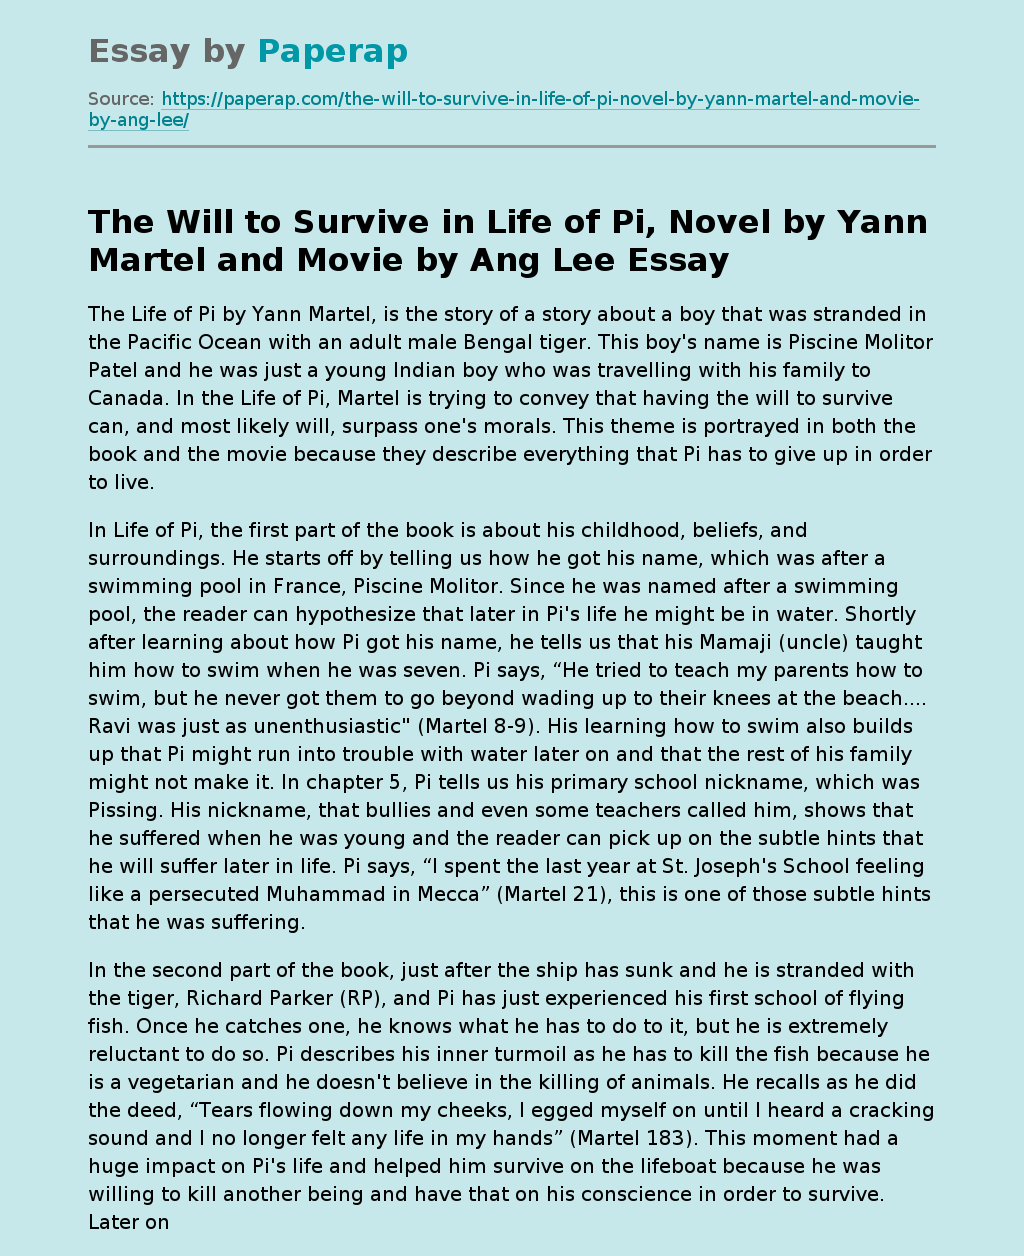 The Will to Survive in Life of Pi, Novel by Yann Martel and Movie by Ang Lee